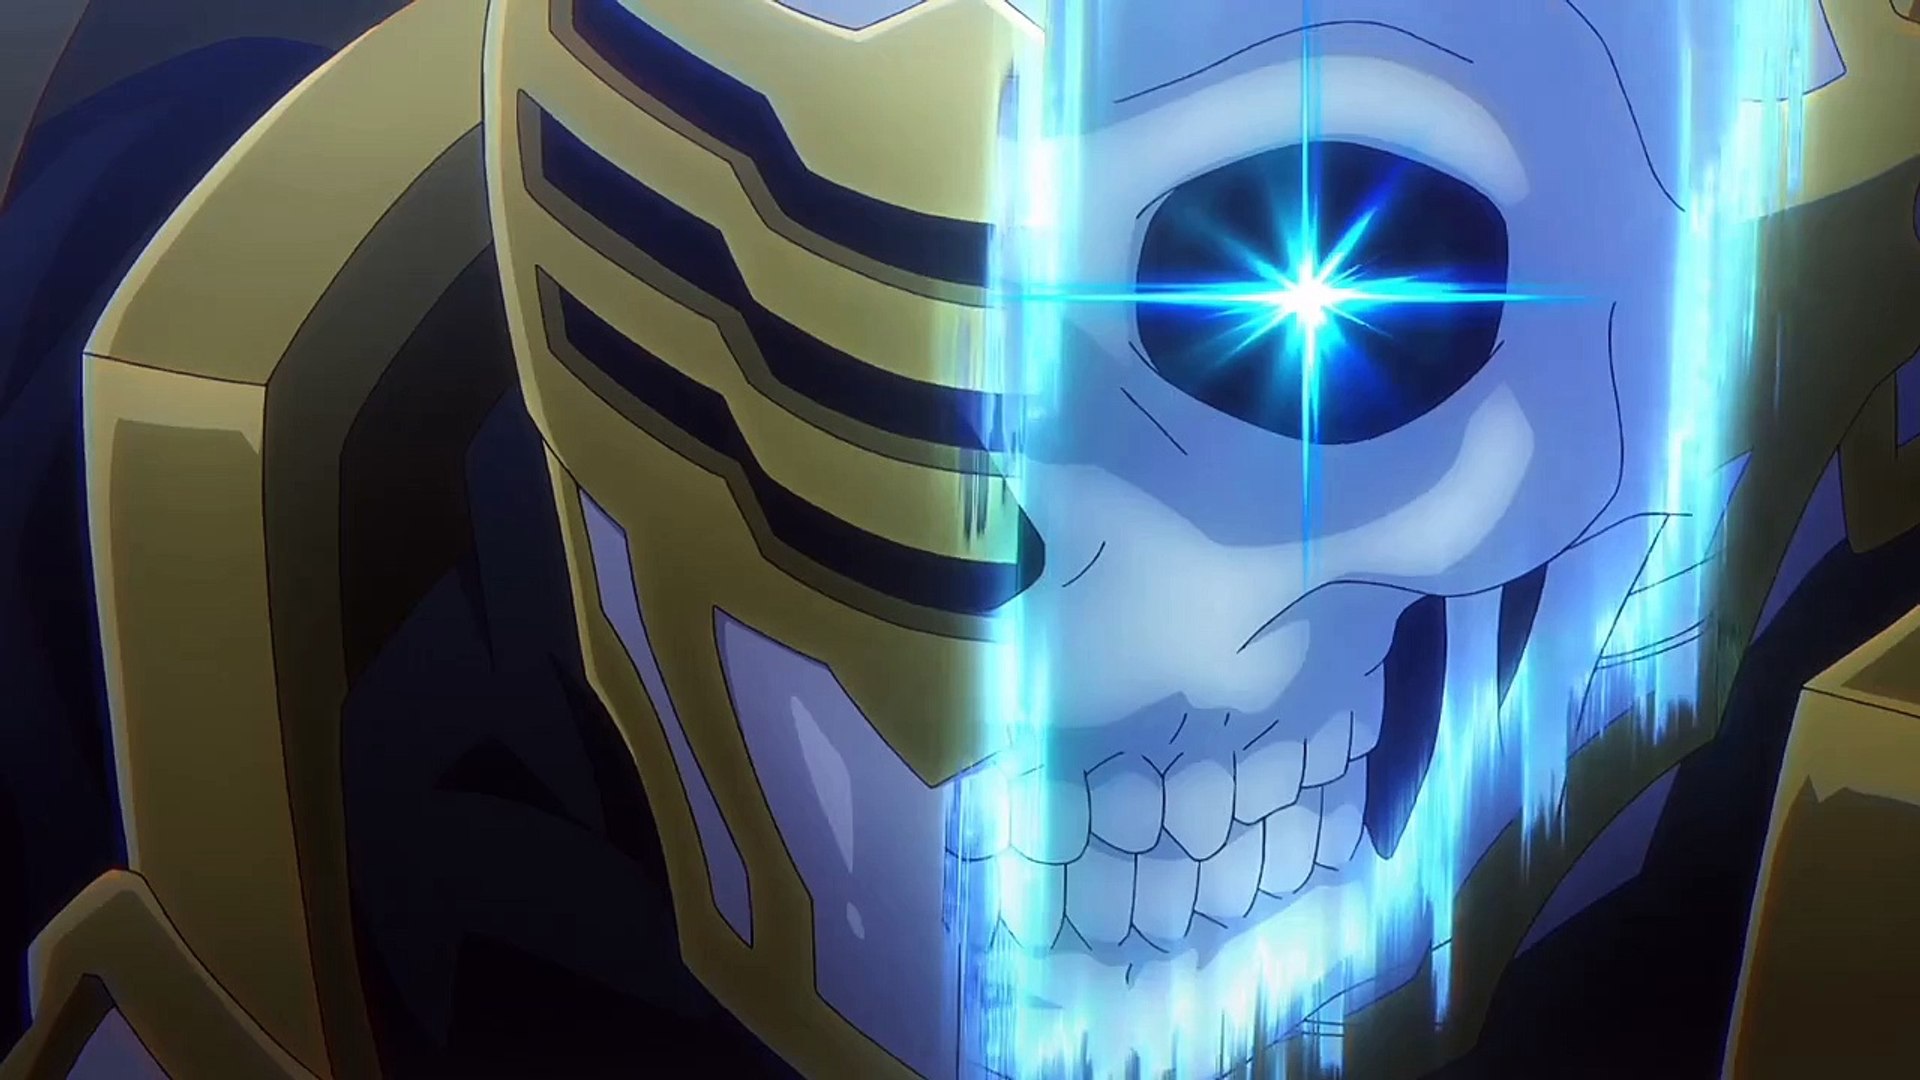 Skeleton Knight in Another World - EP 9 English Subbed - video Dailymotion